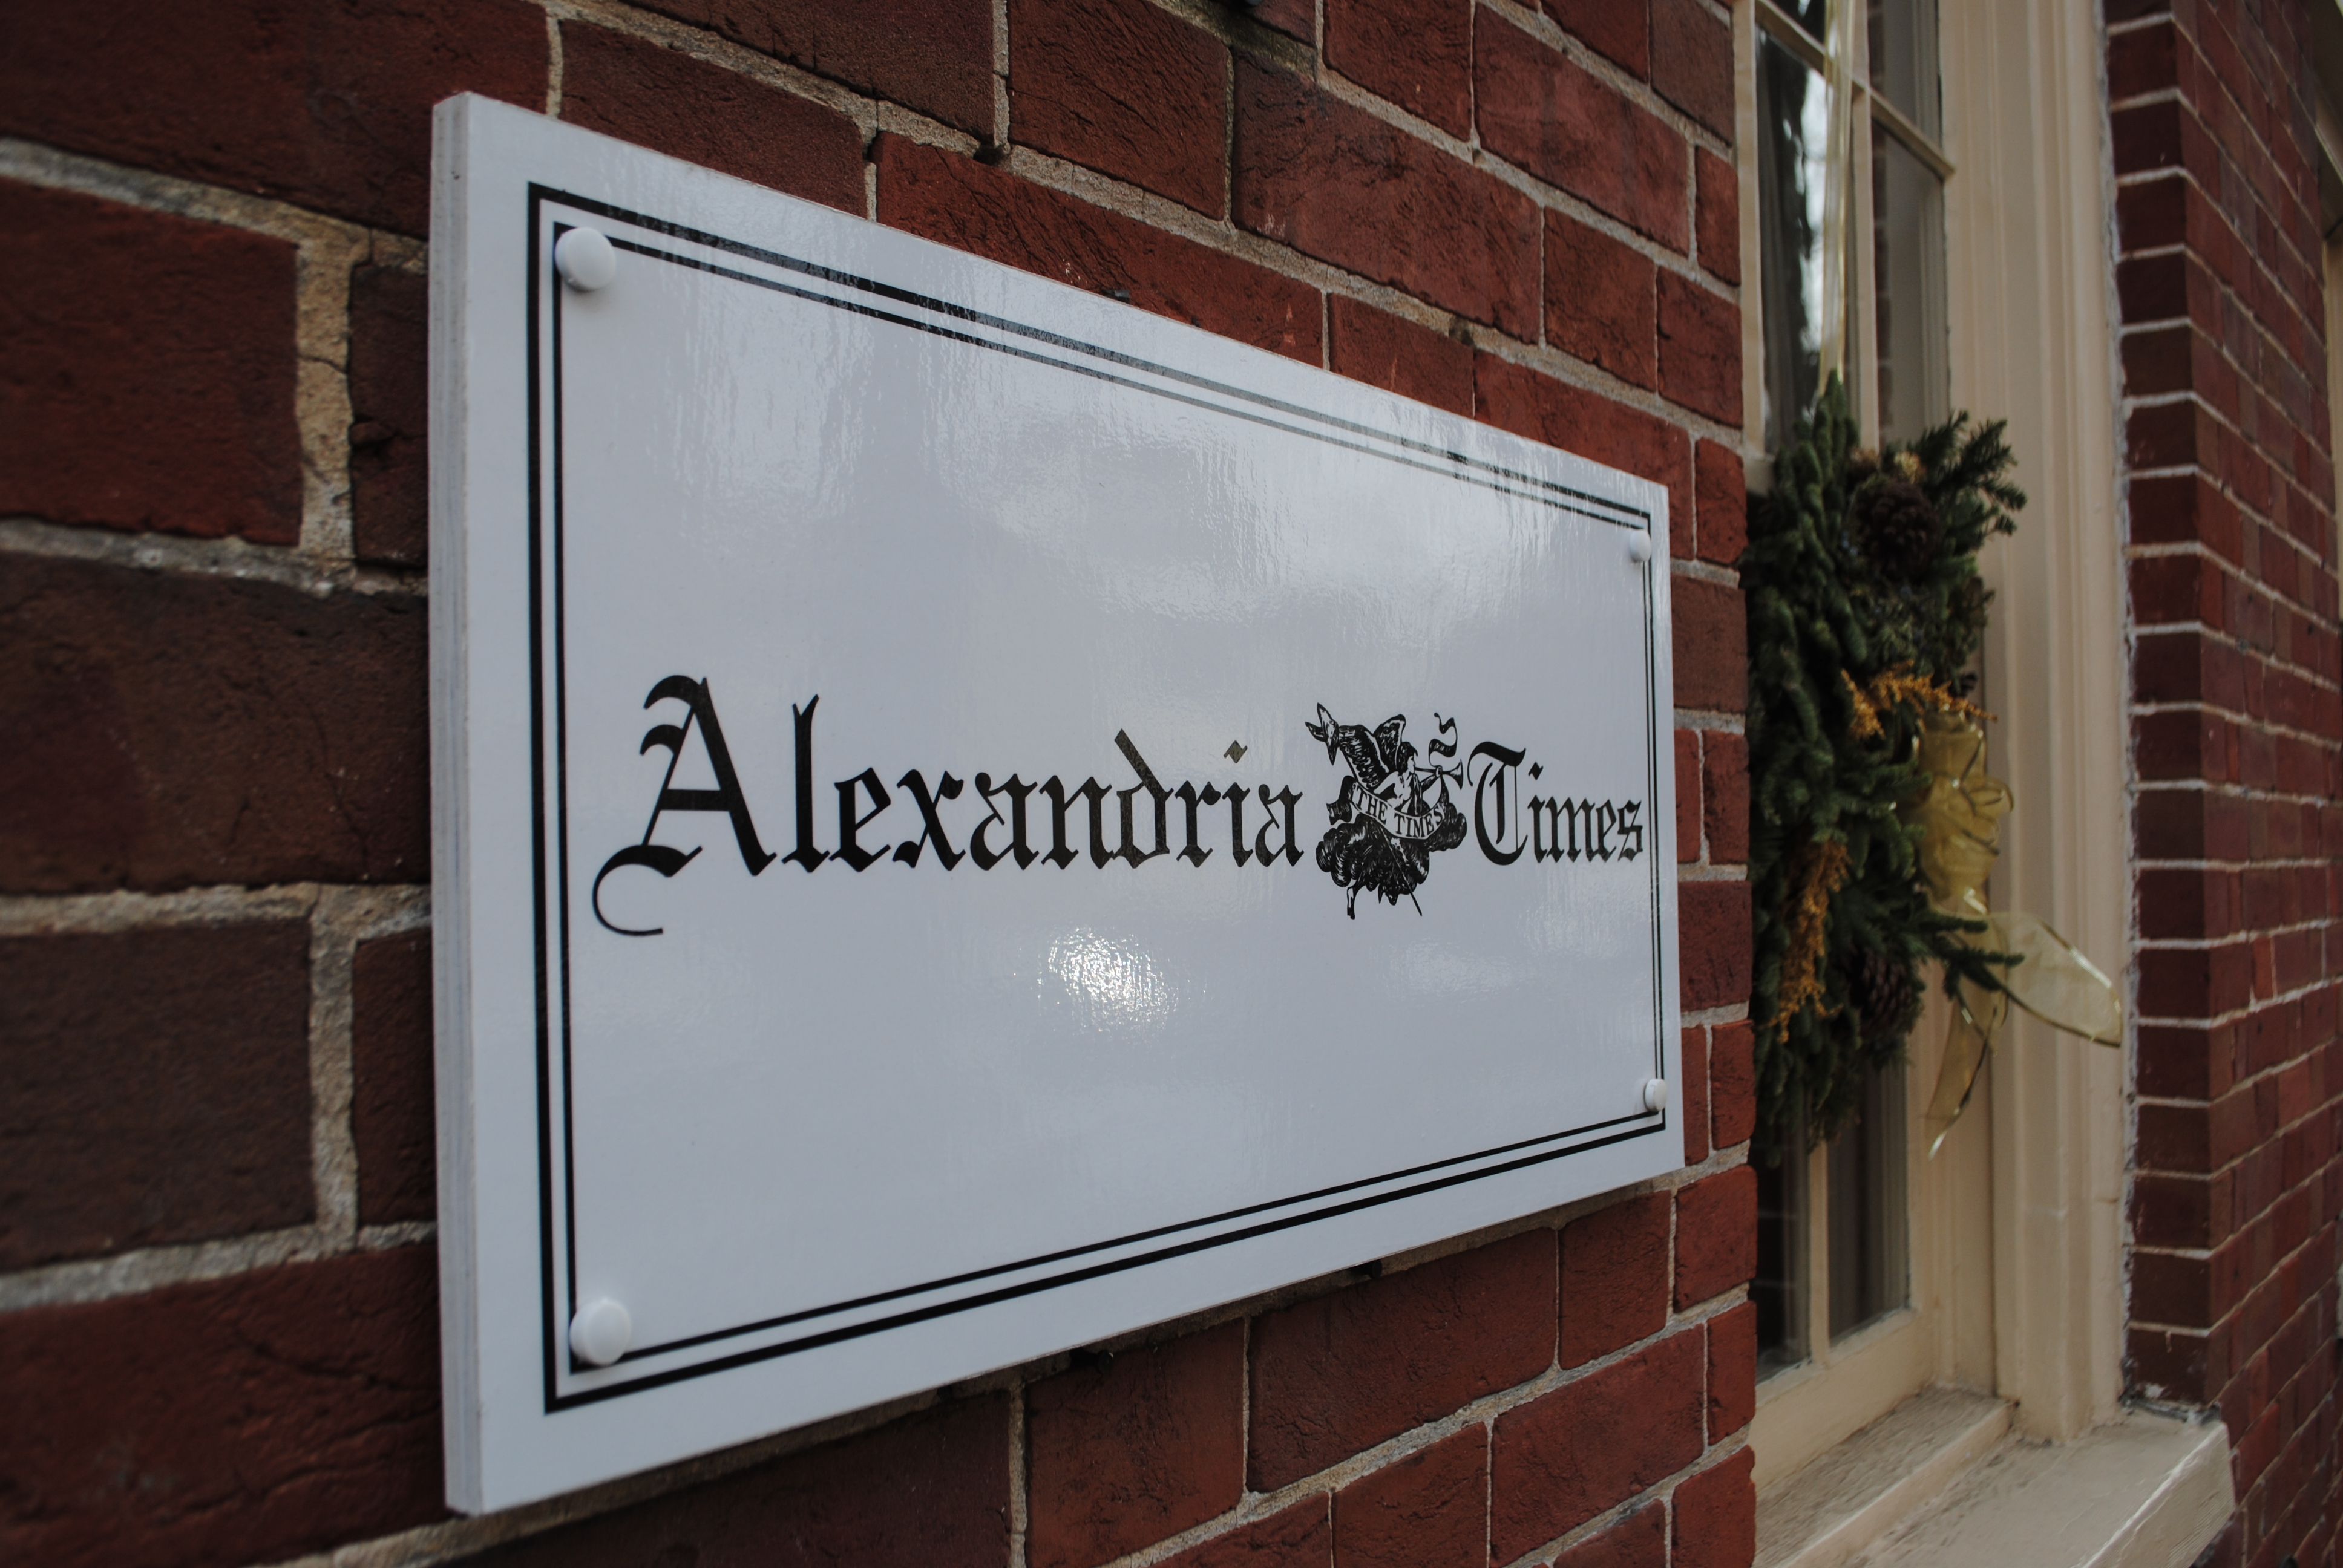 Our View: A look back at 10 years of the Alexandria Times